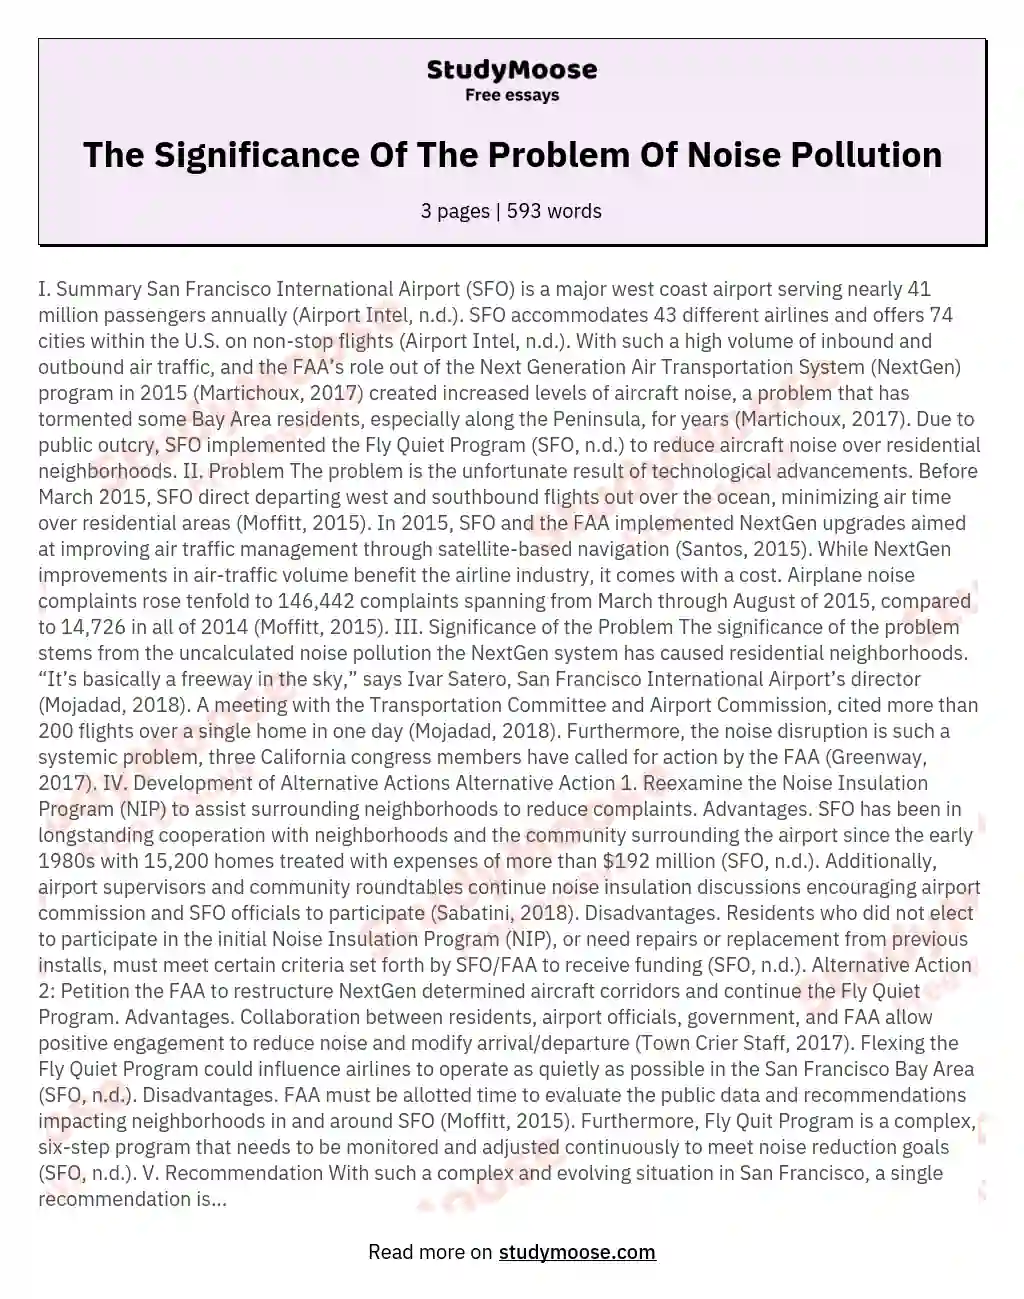 The Significance Of The Problem Of Noise Pollution essay